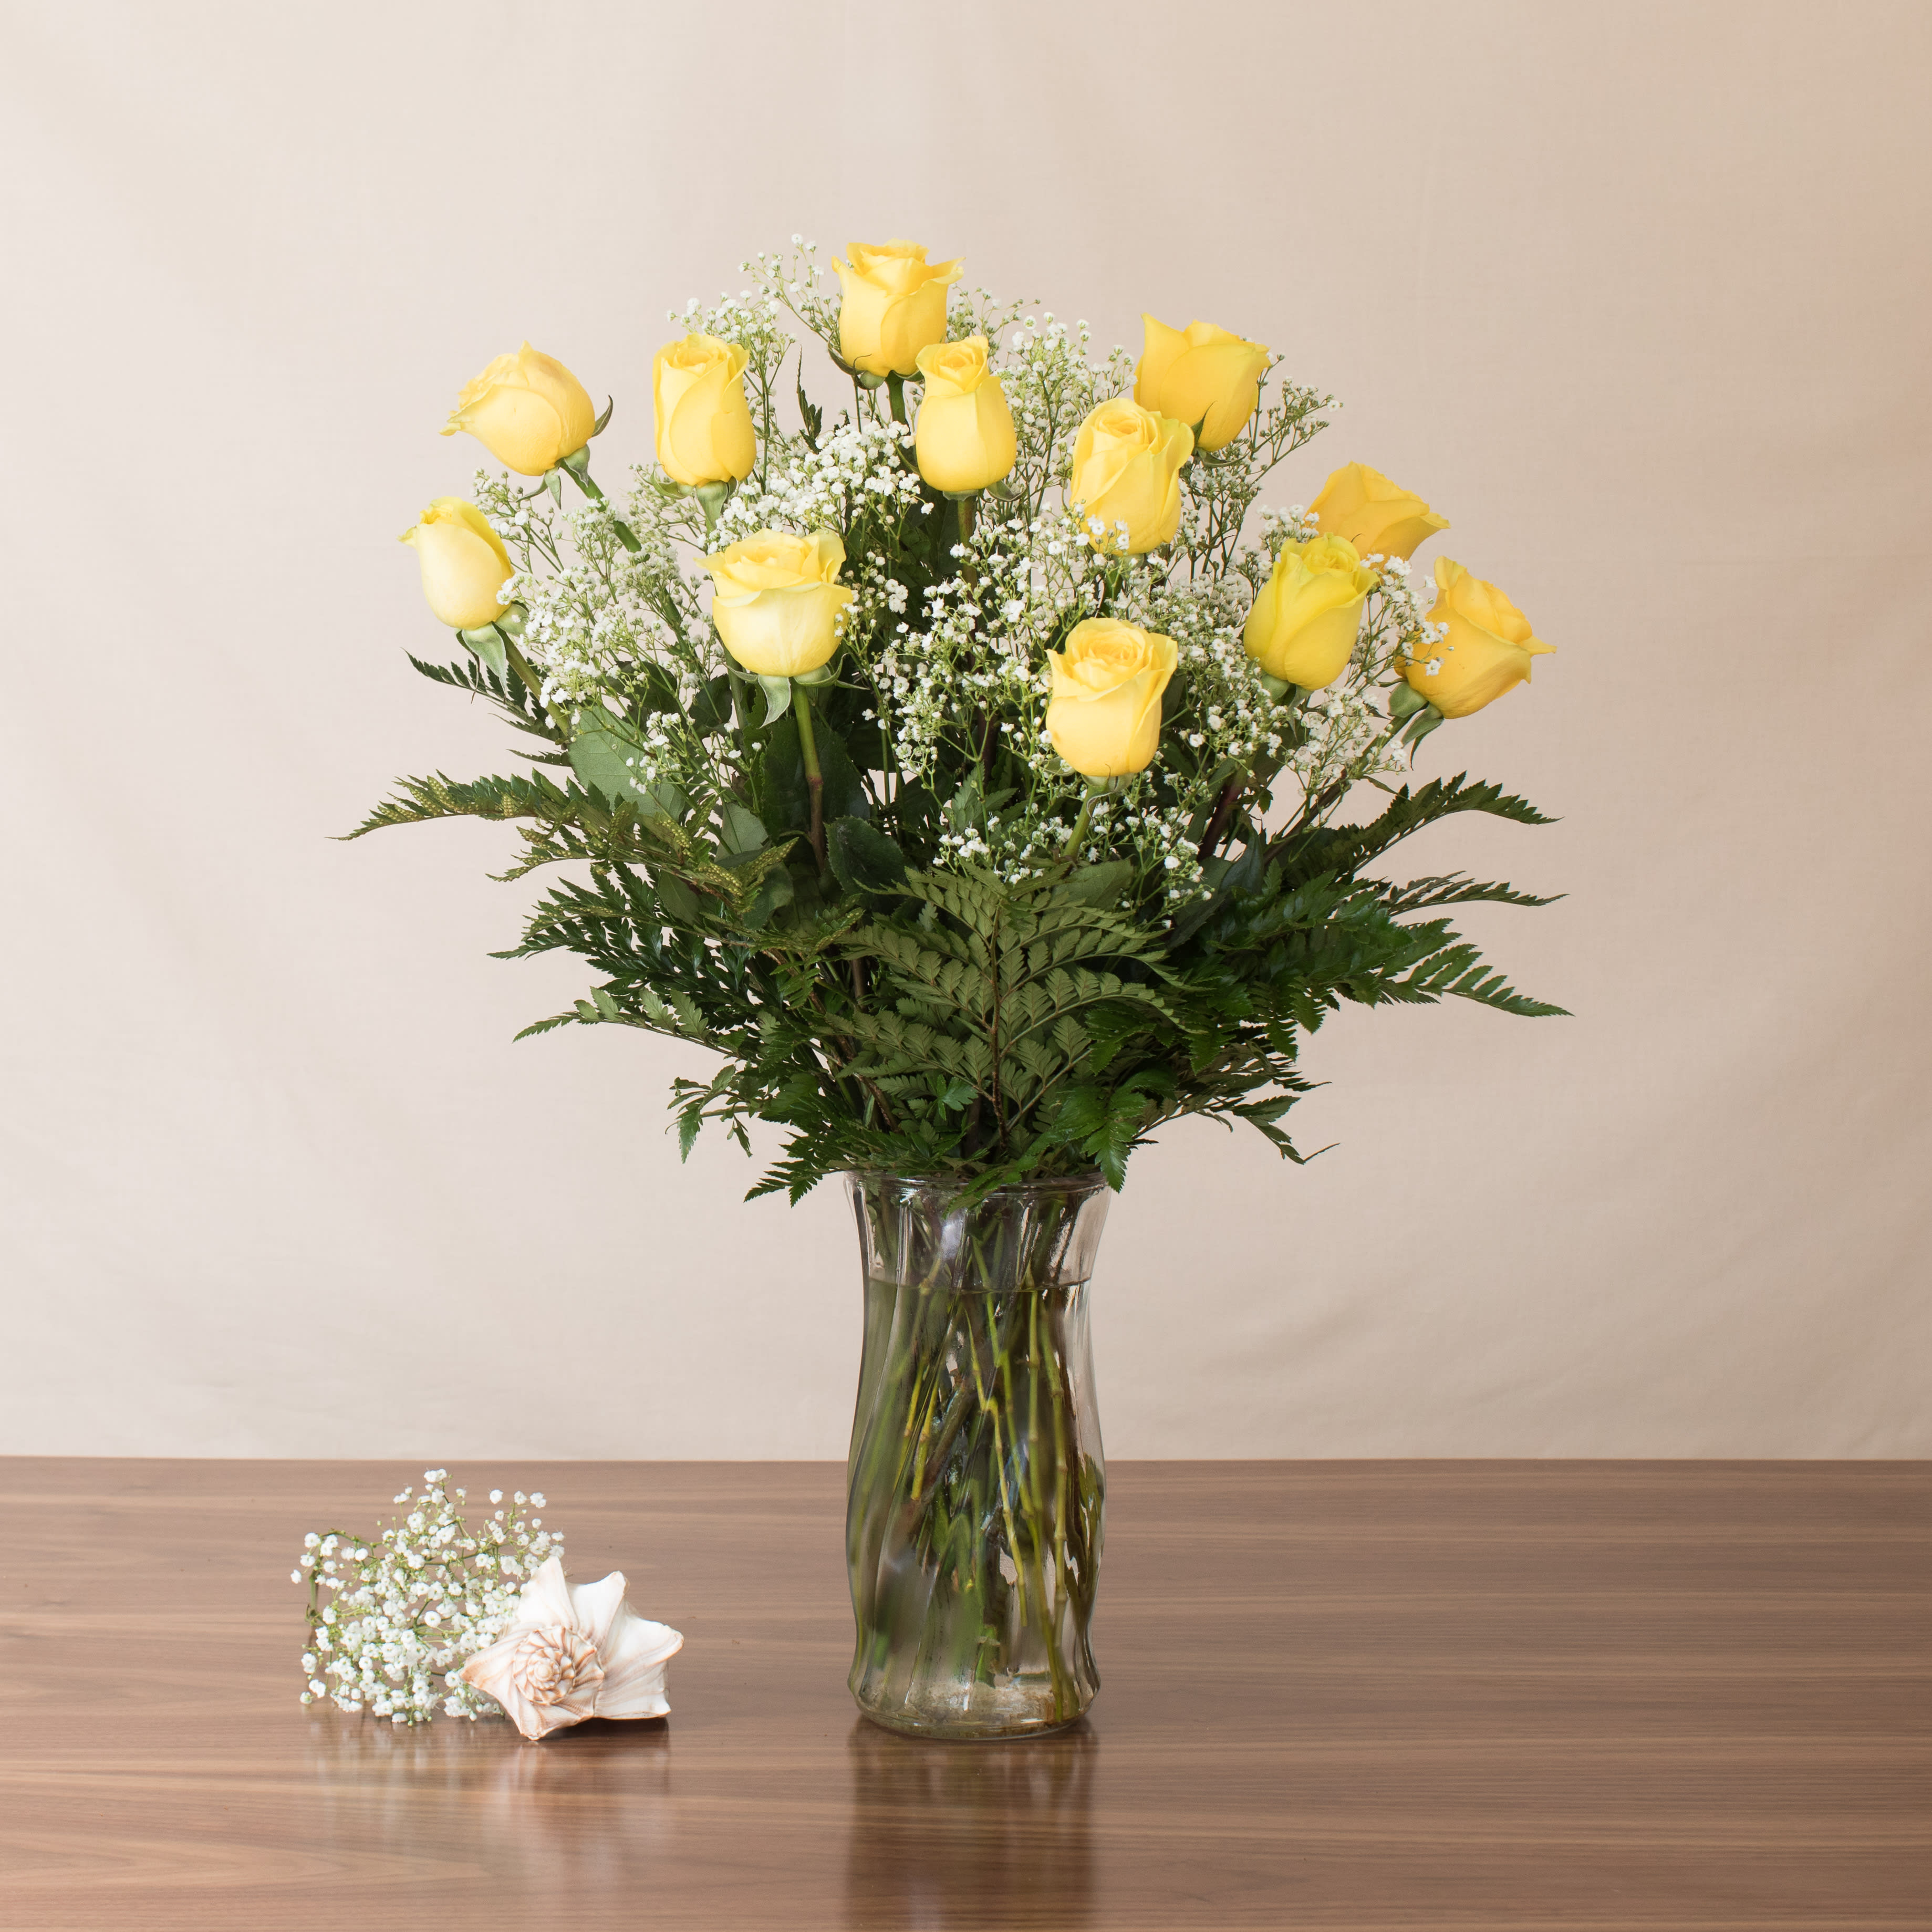 Watanabe Yellow Rose Masterpiece - Brighten up the day of your special someone with a dozen of these Yellow long stem roses, with accent greens, served in a beautiful glass vase!